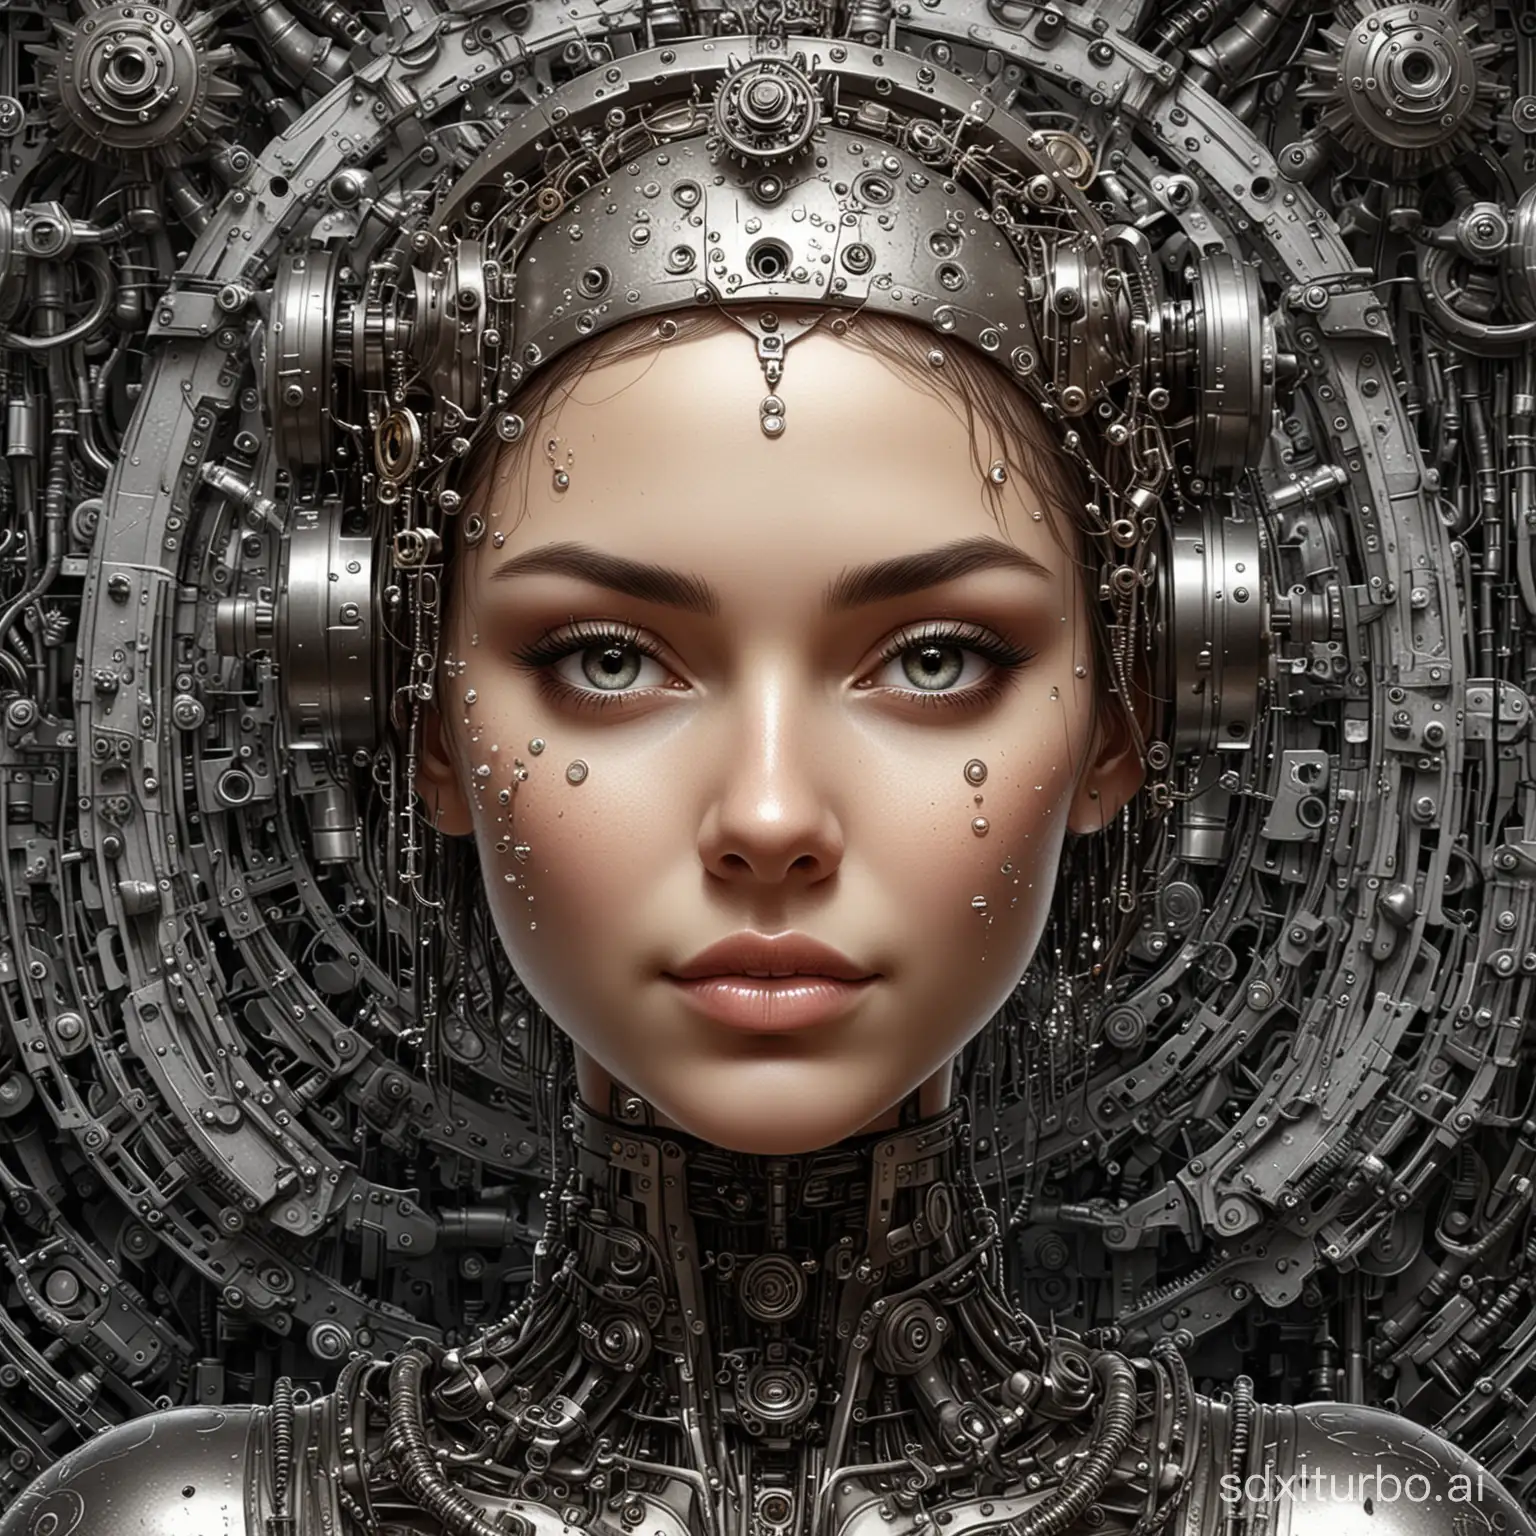 Fusion-of-Organic-and-Mechanical-Elements-Handsome-Girl-with-Metal-Mechanical-Decorated-Human-Head